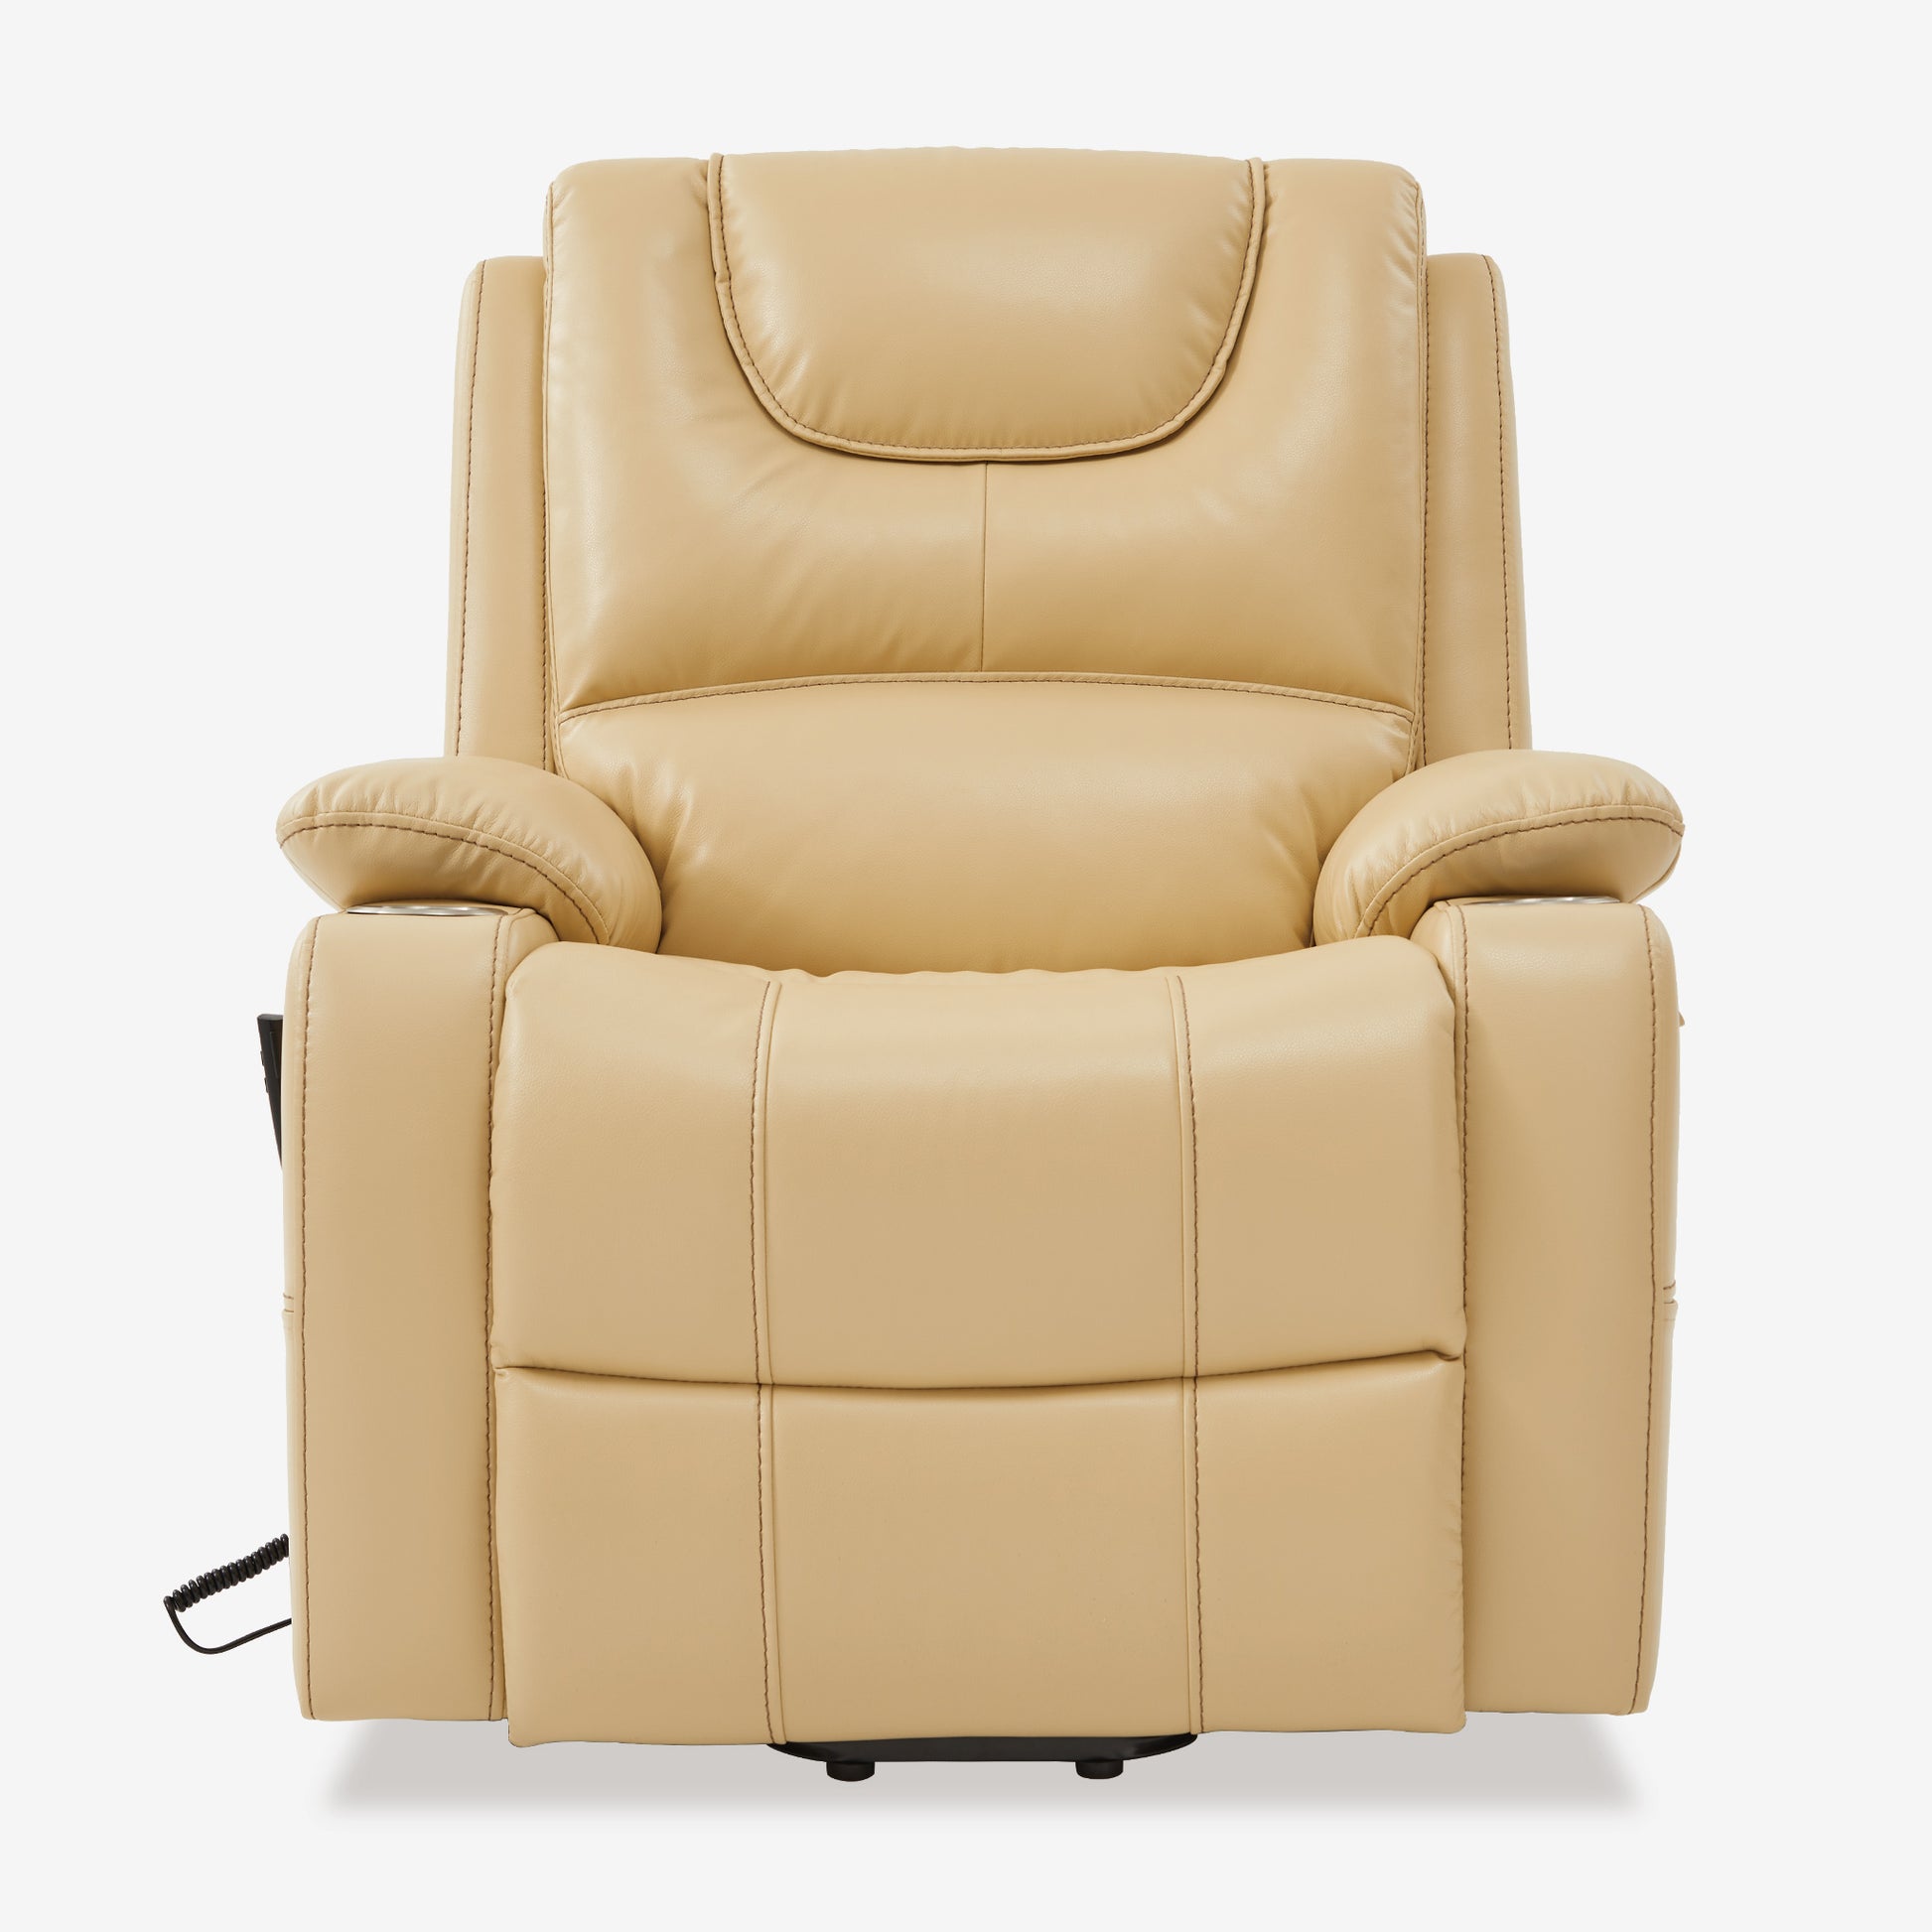 Lay Flat Sleeper Recliner With Heating Massage And Cup Holder